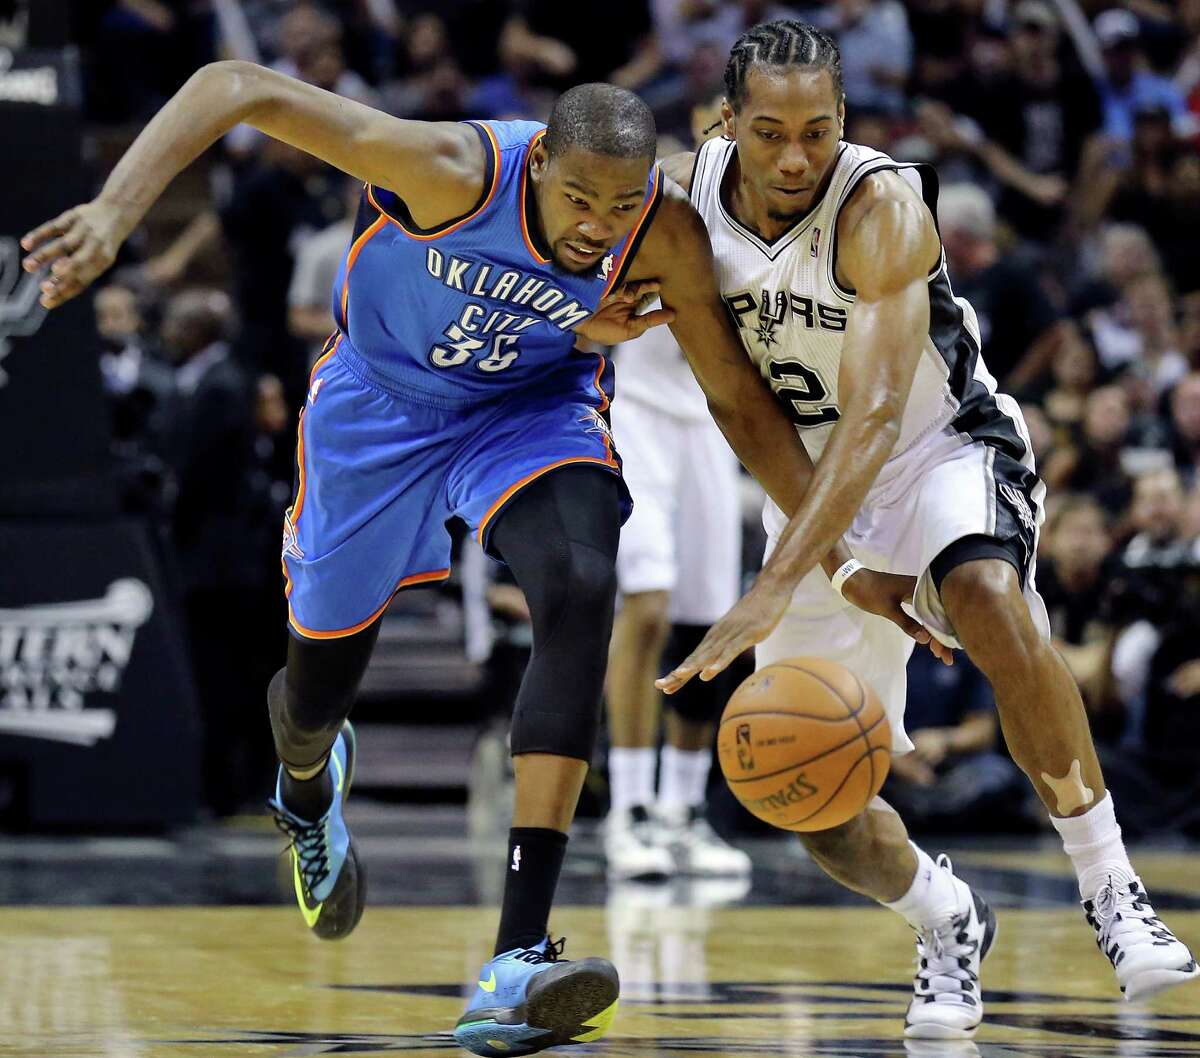 Oklahoma City Thunder's Kevin Durant and San Antonio Spurs' Kawhi Leonard chase after a loose ball during second half action of Game 2 in the Western Conference Finals Wednesday May 21, 2014 at the AT&T Center. The Spurs won 112-77.